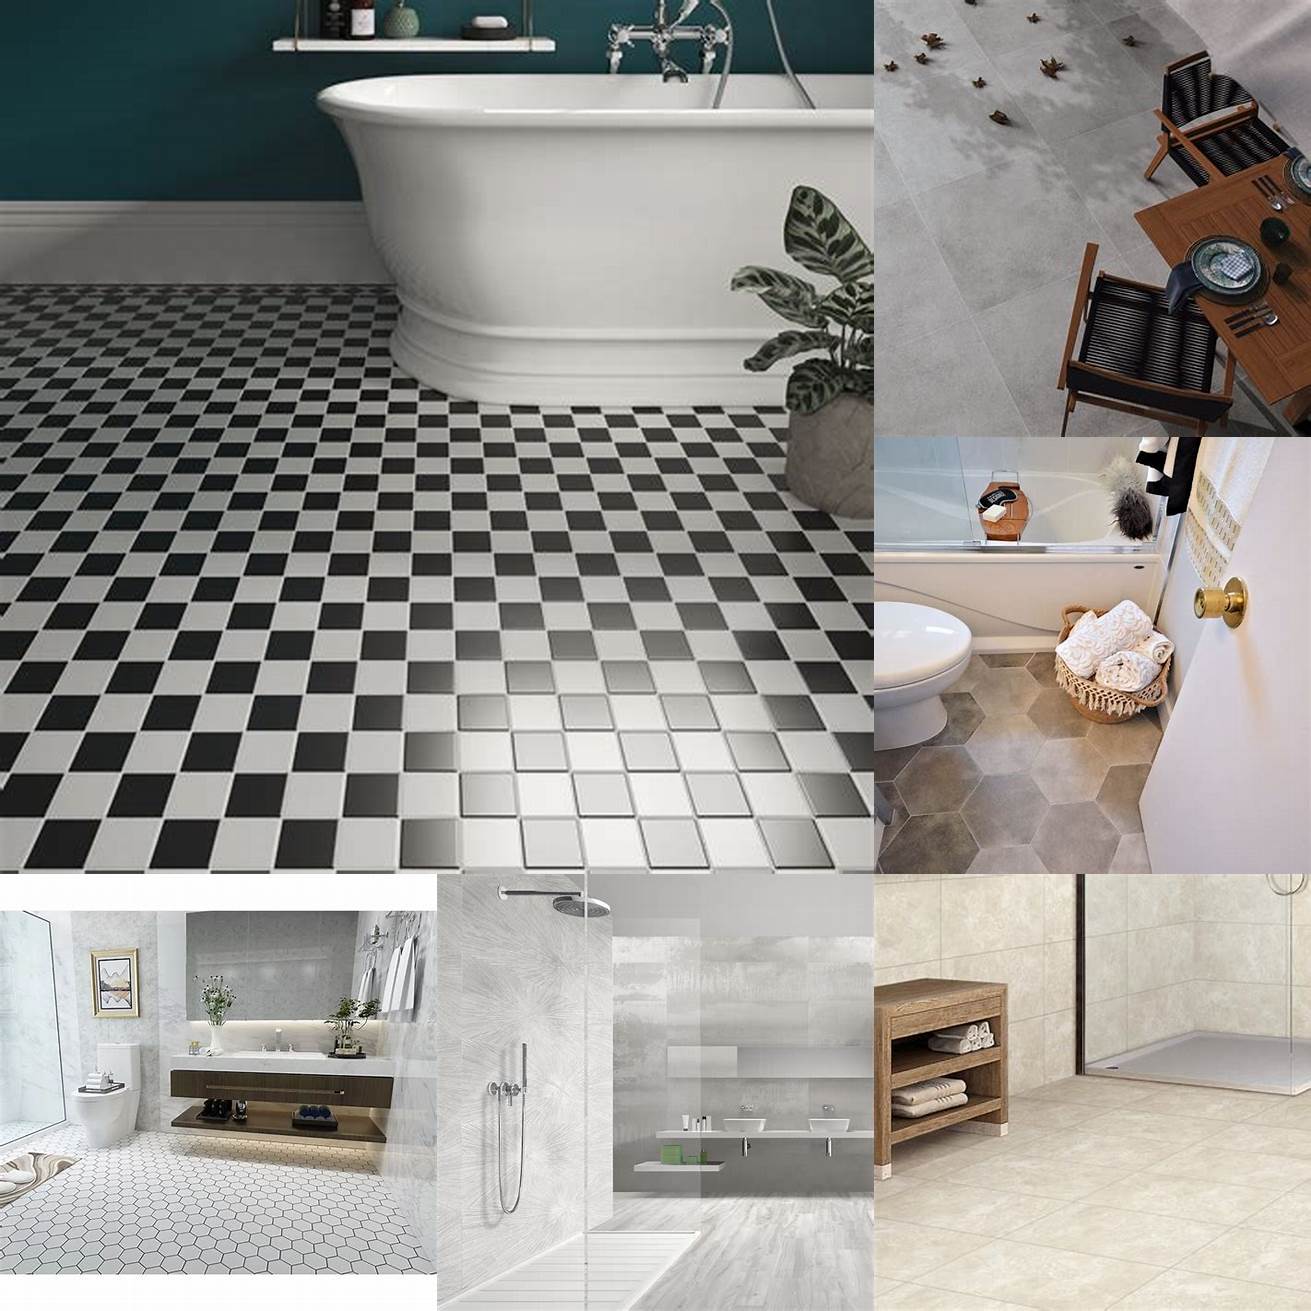 Porcelain A cost-effective option porcelain is easy to clean and maintain It comes in different colors and patterns to fit your bathroom design However it can chip or crack if not handled carefully